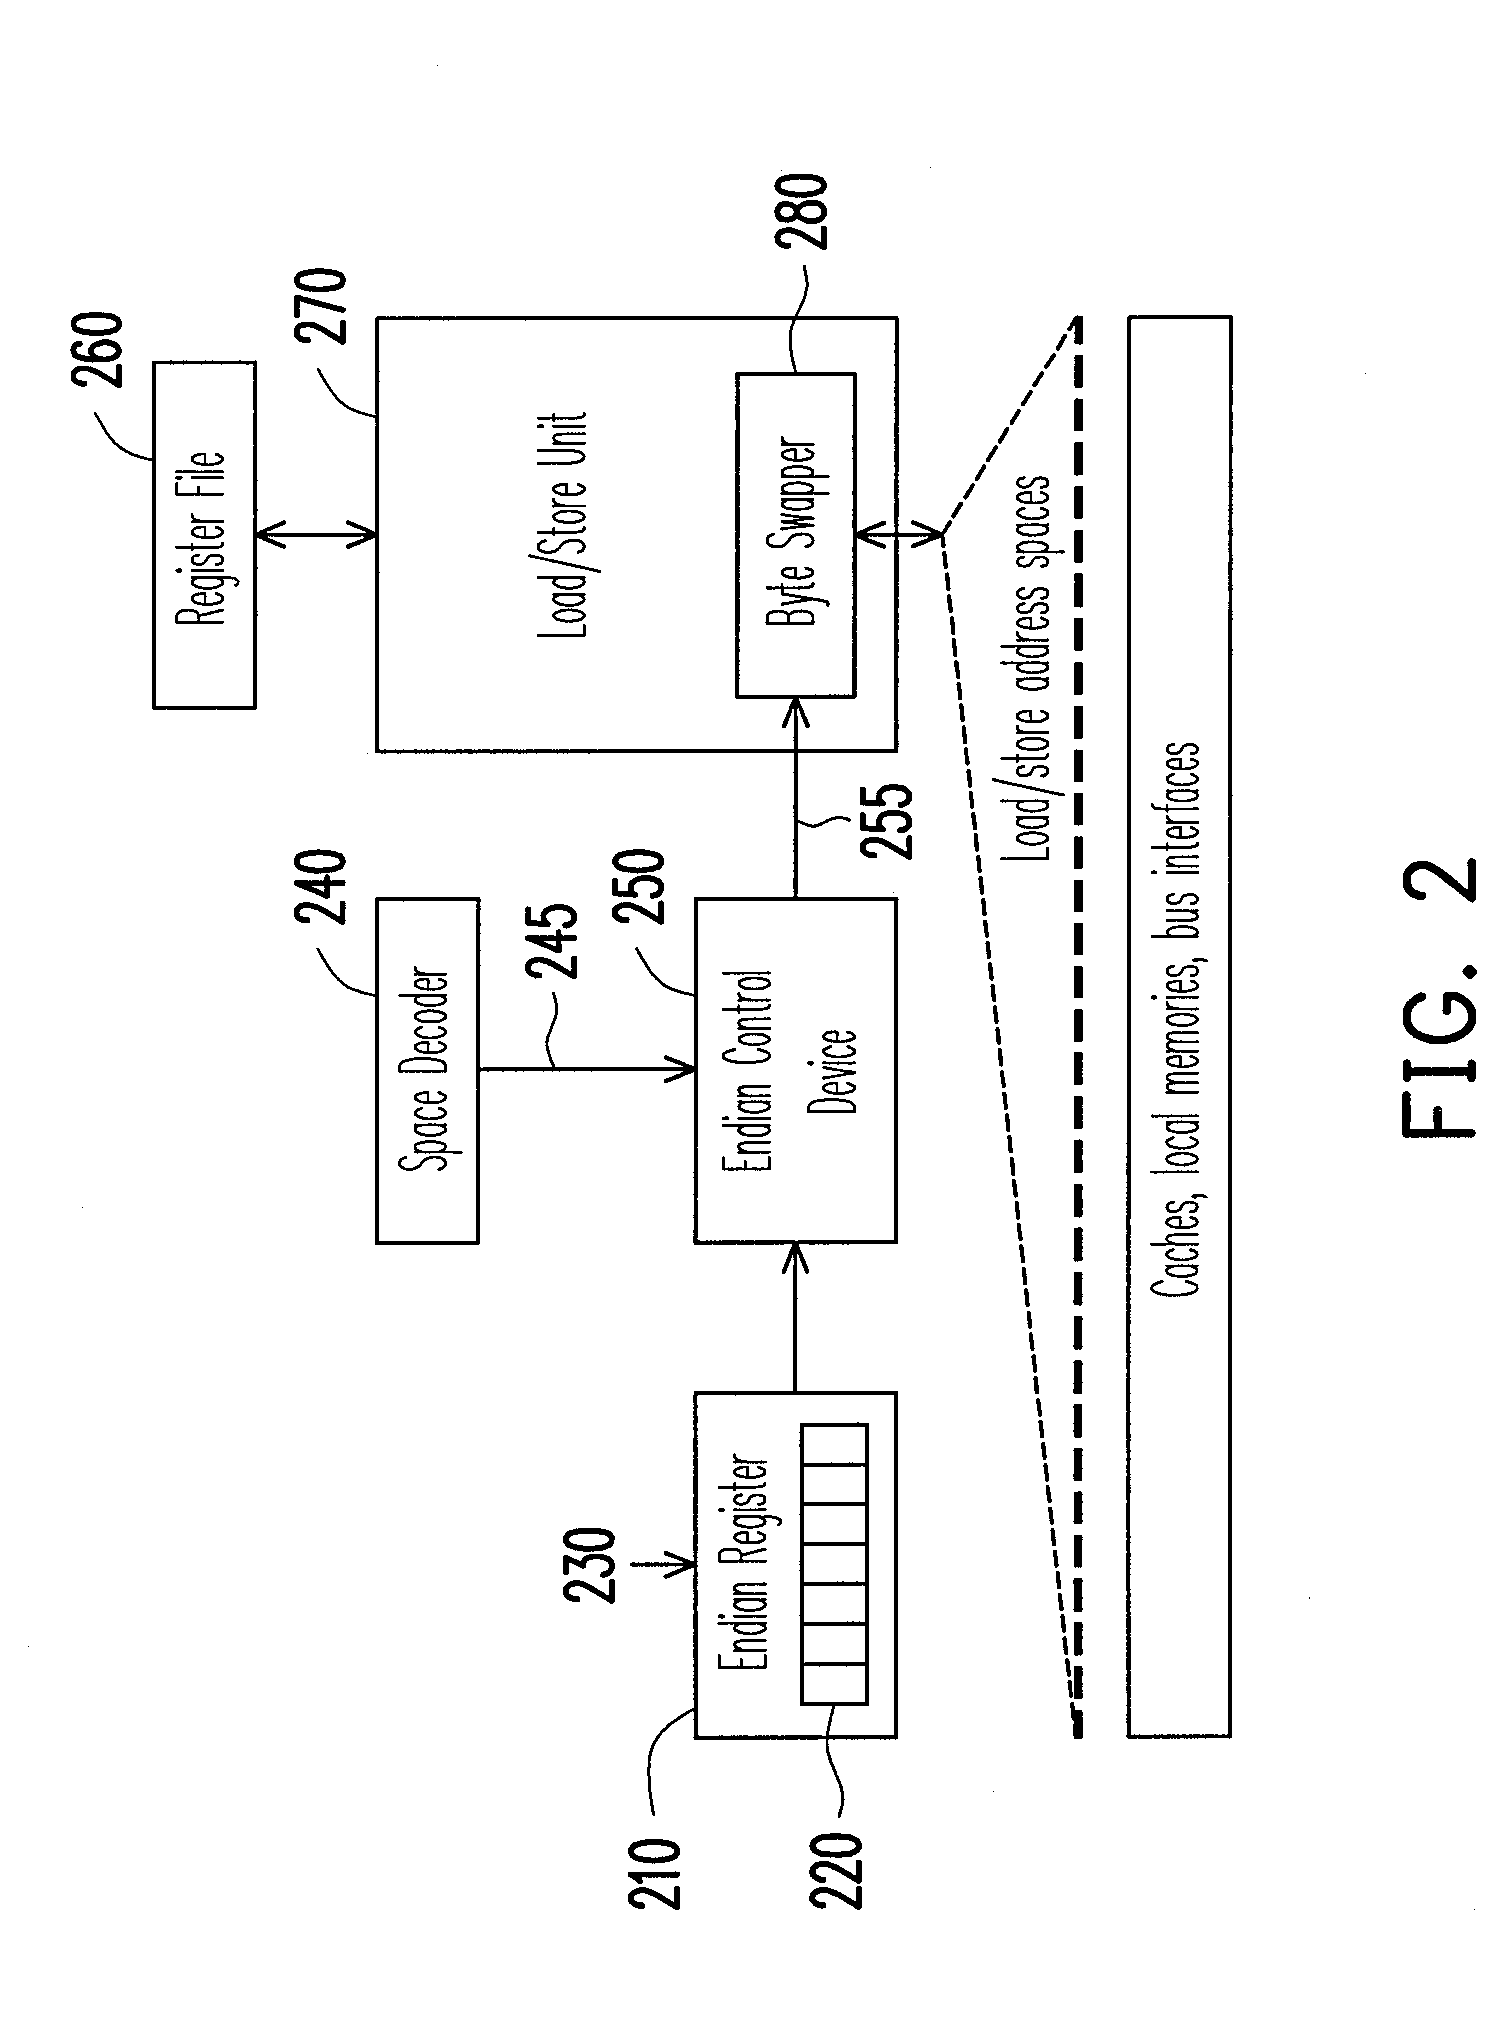 Data processing engine with integrated data endianness control mechanism